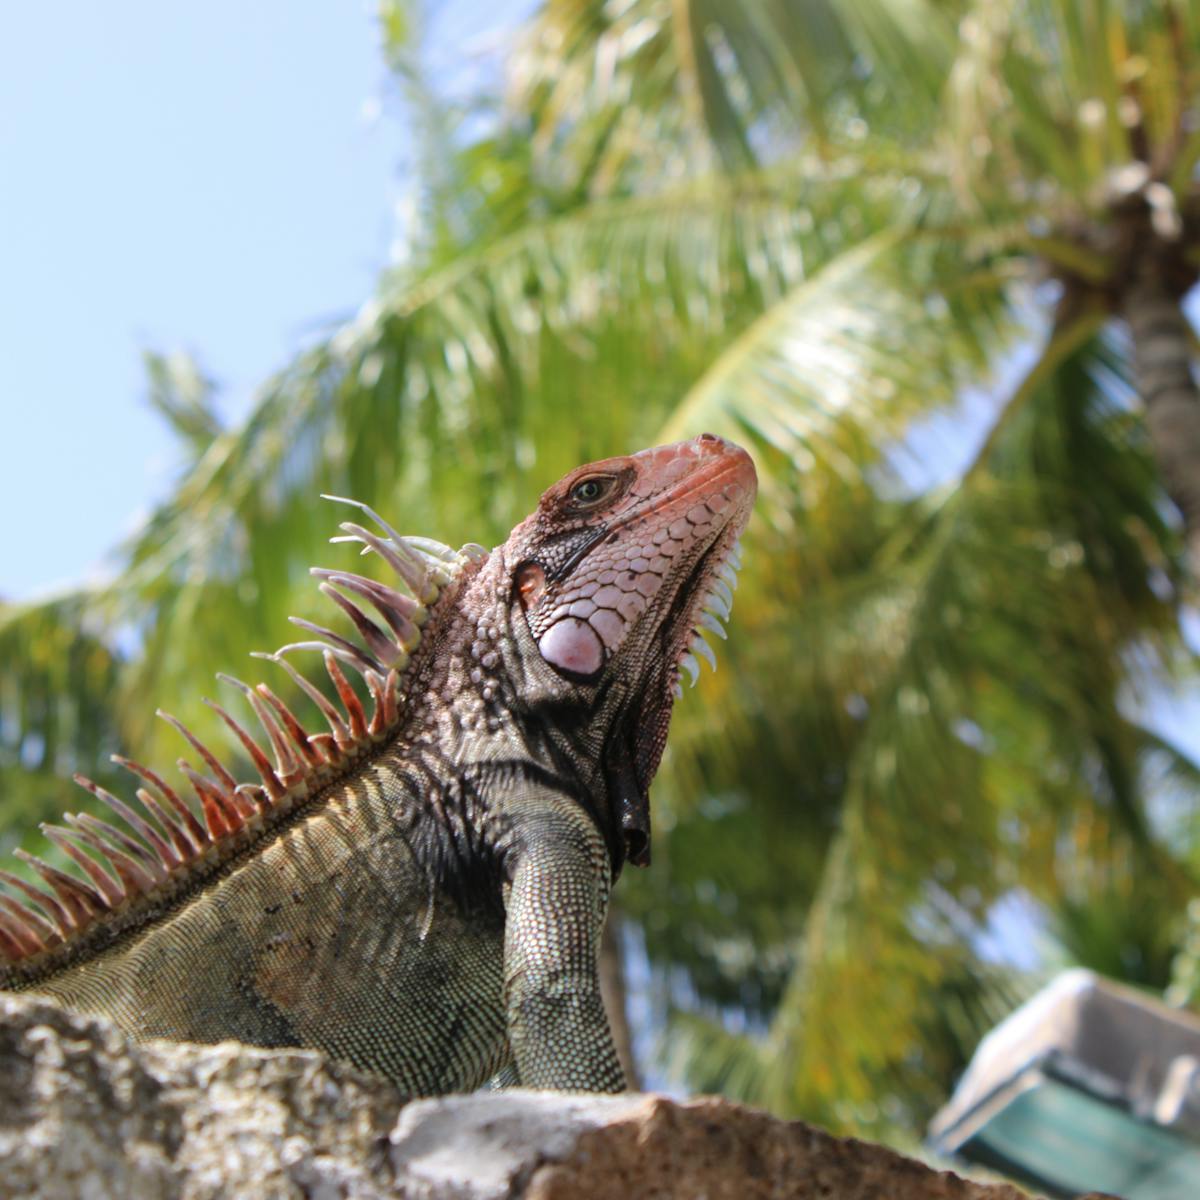 A lizard perched on a rock at Coral World Ocean Park